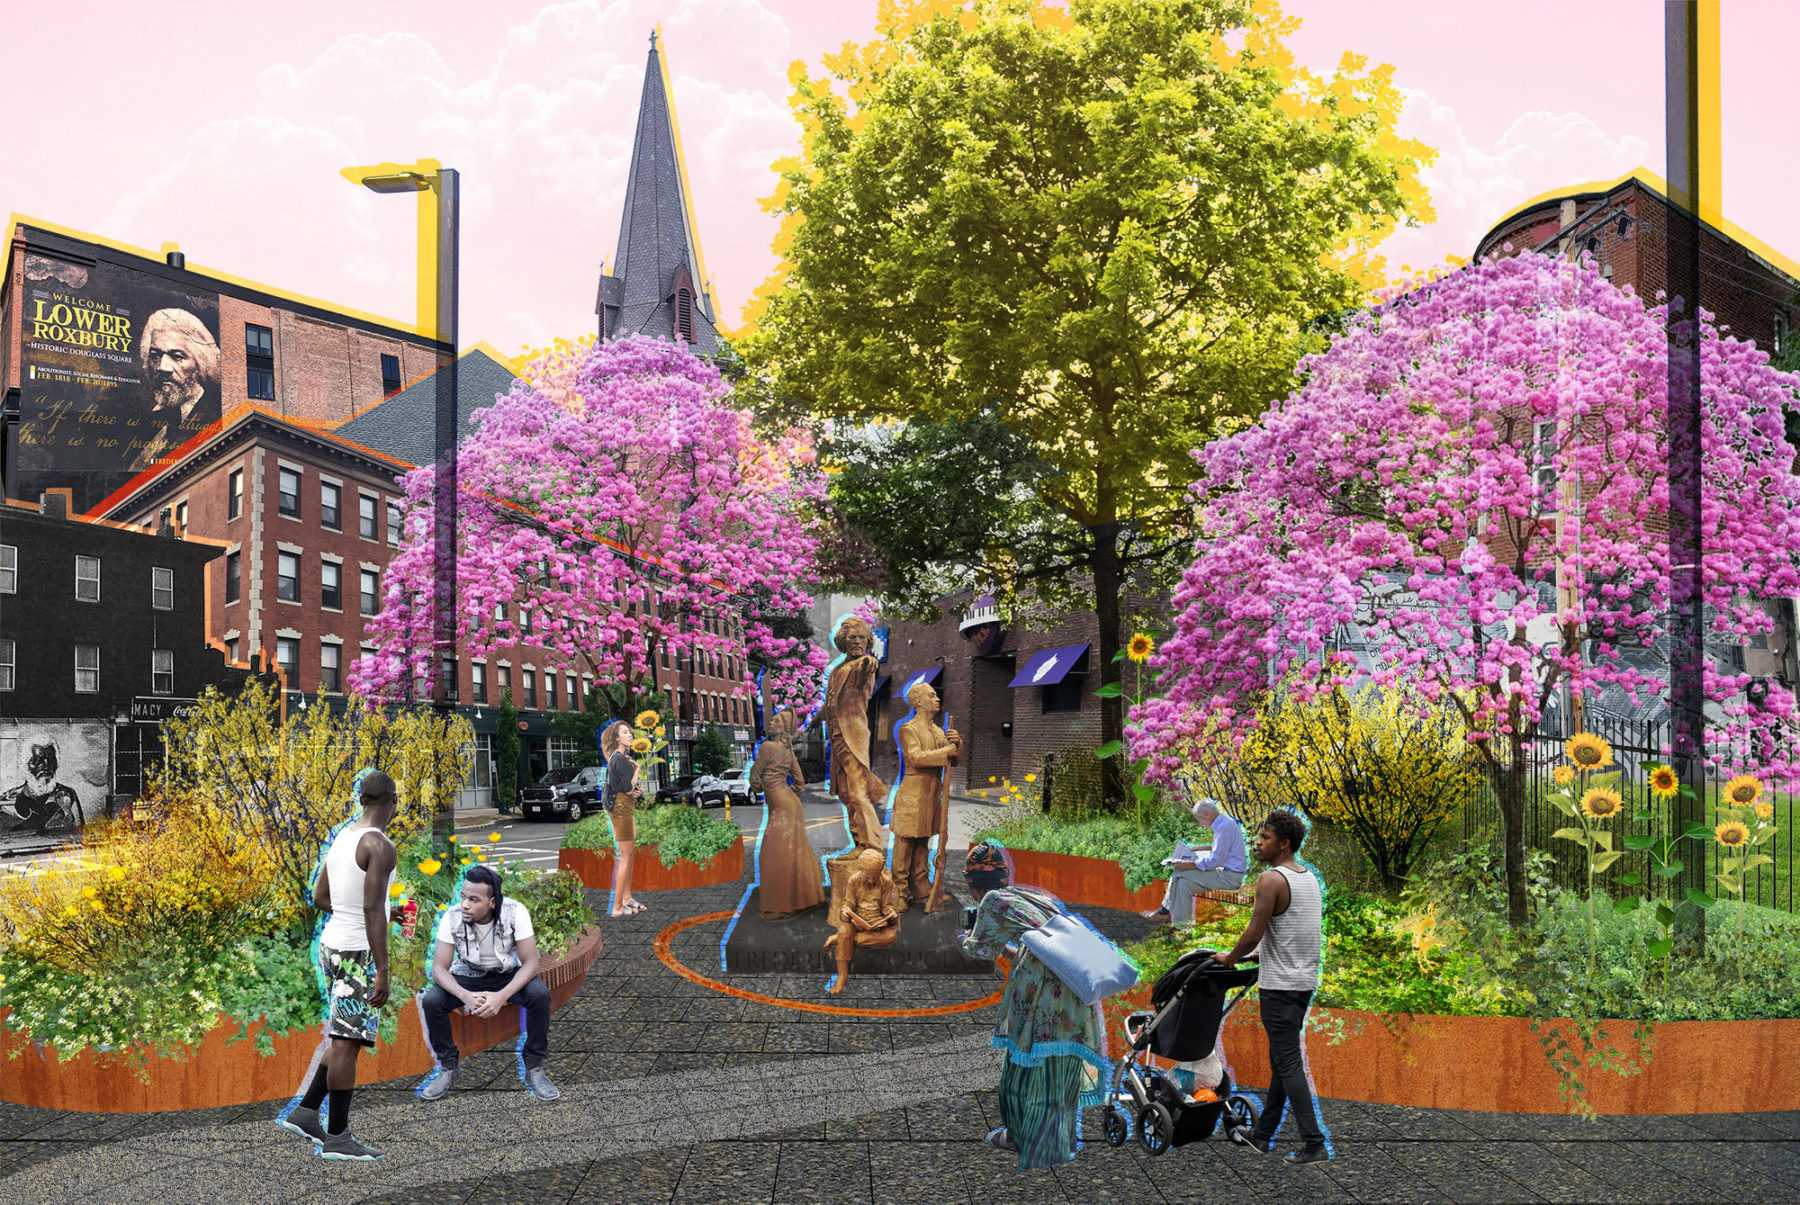 Rendering showing people in colorful park surrounding statue of Frederick Douglass